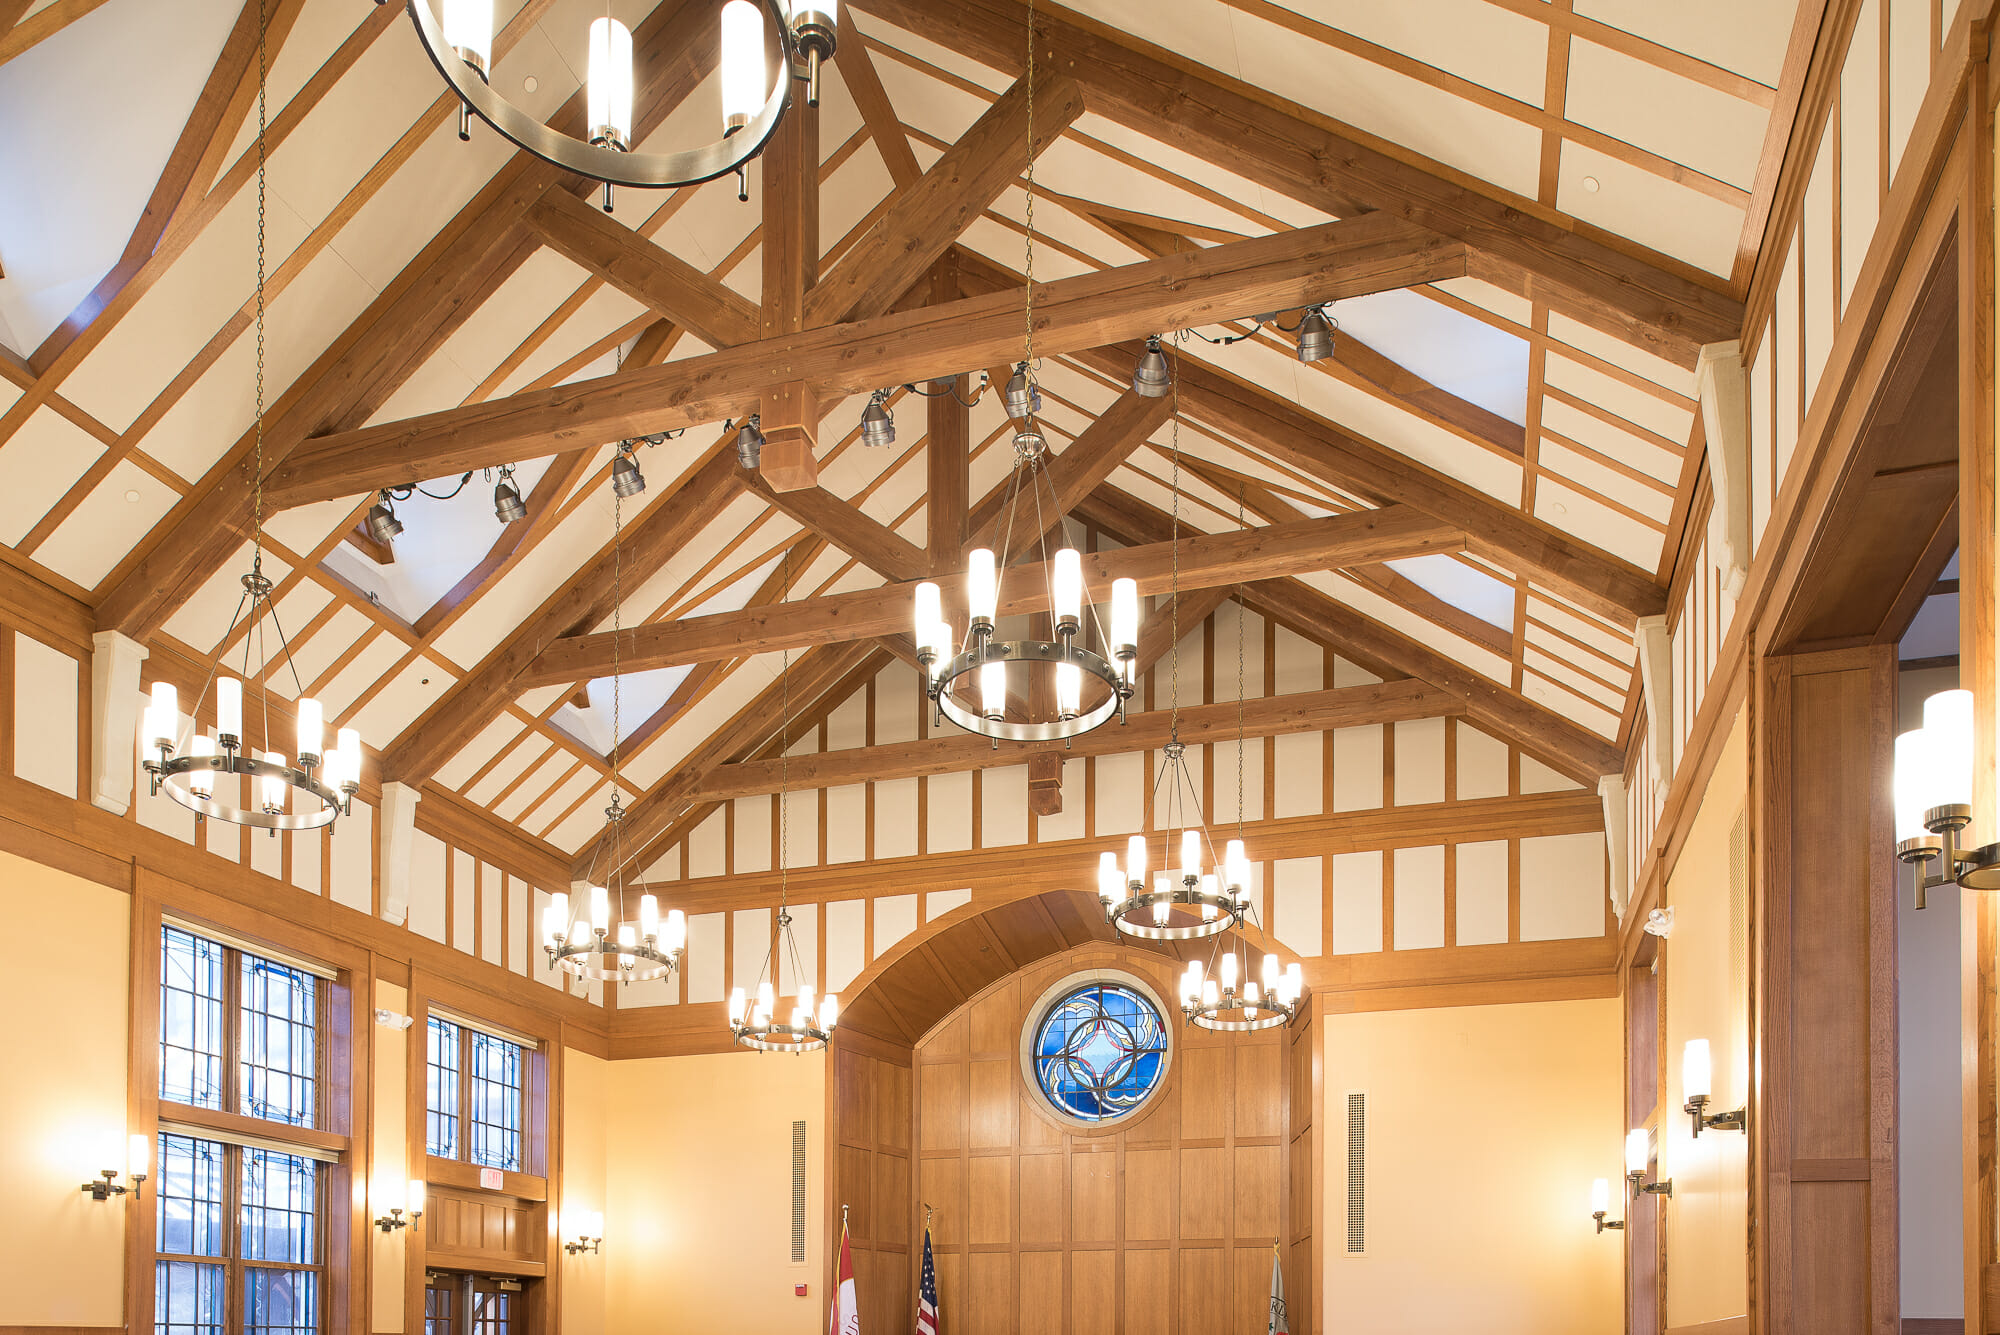 Interior of the Hackley School with Modified King Post trusses for an assembly room